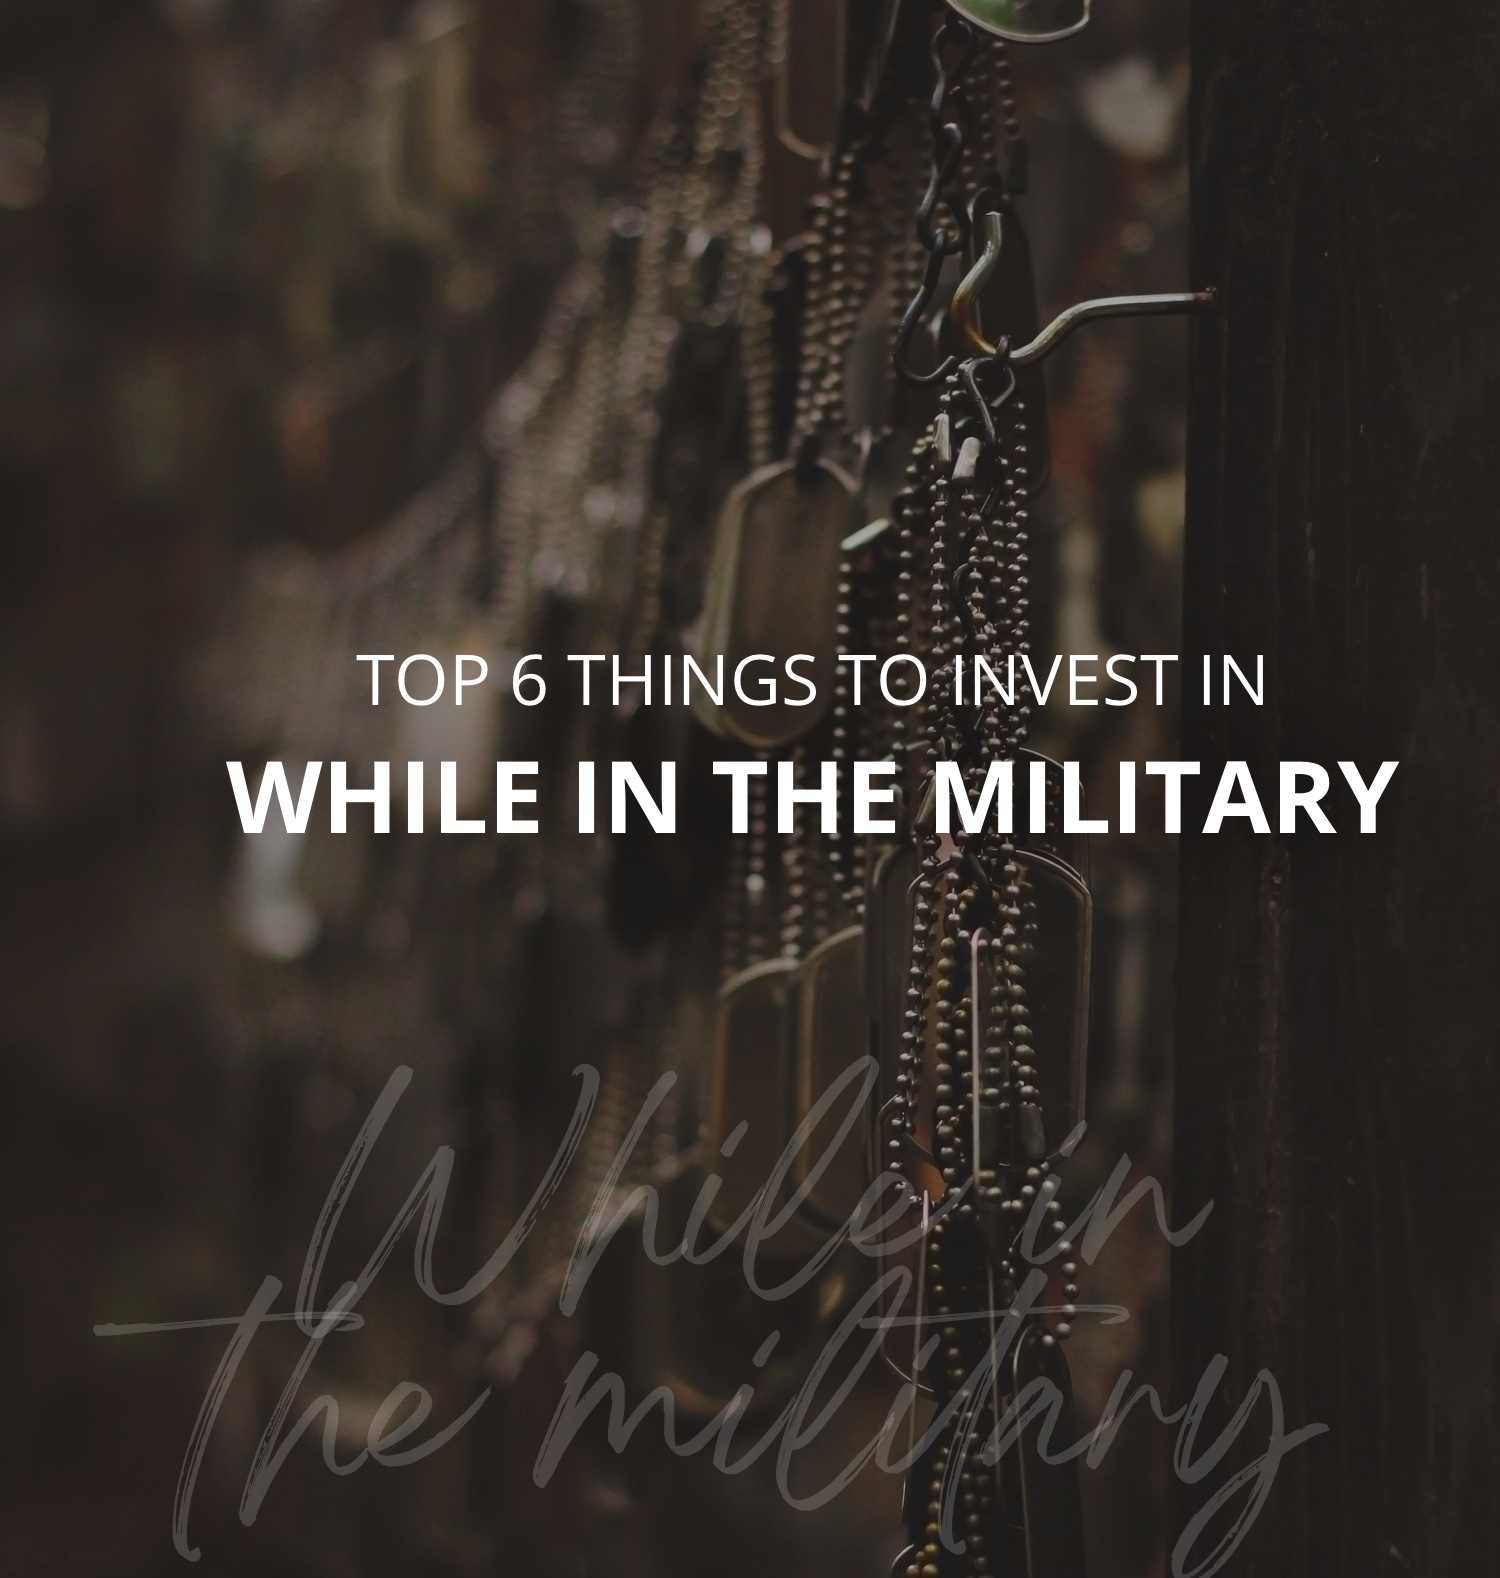 Top 6 Things To Invest While In The Military